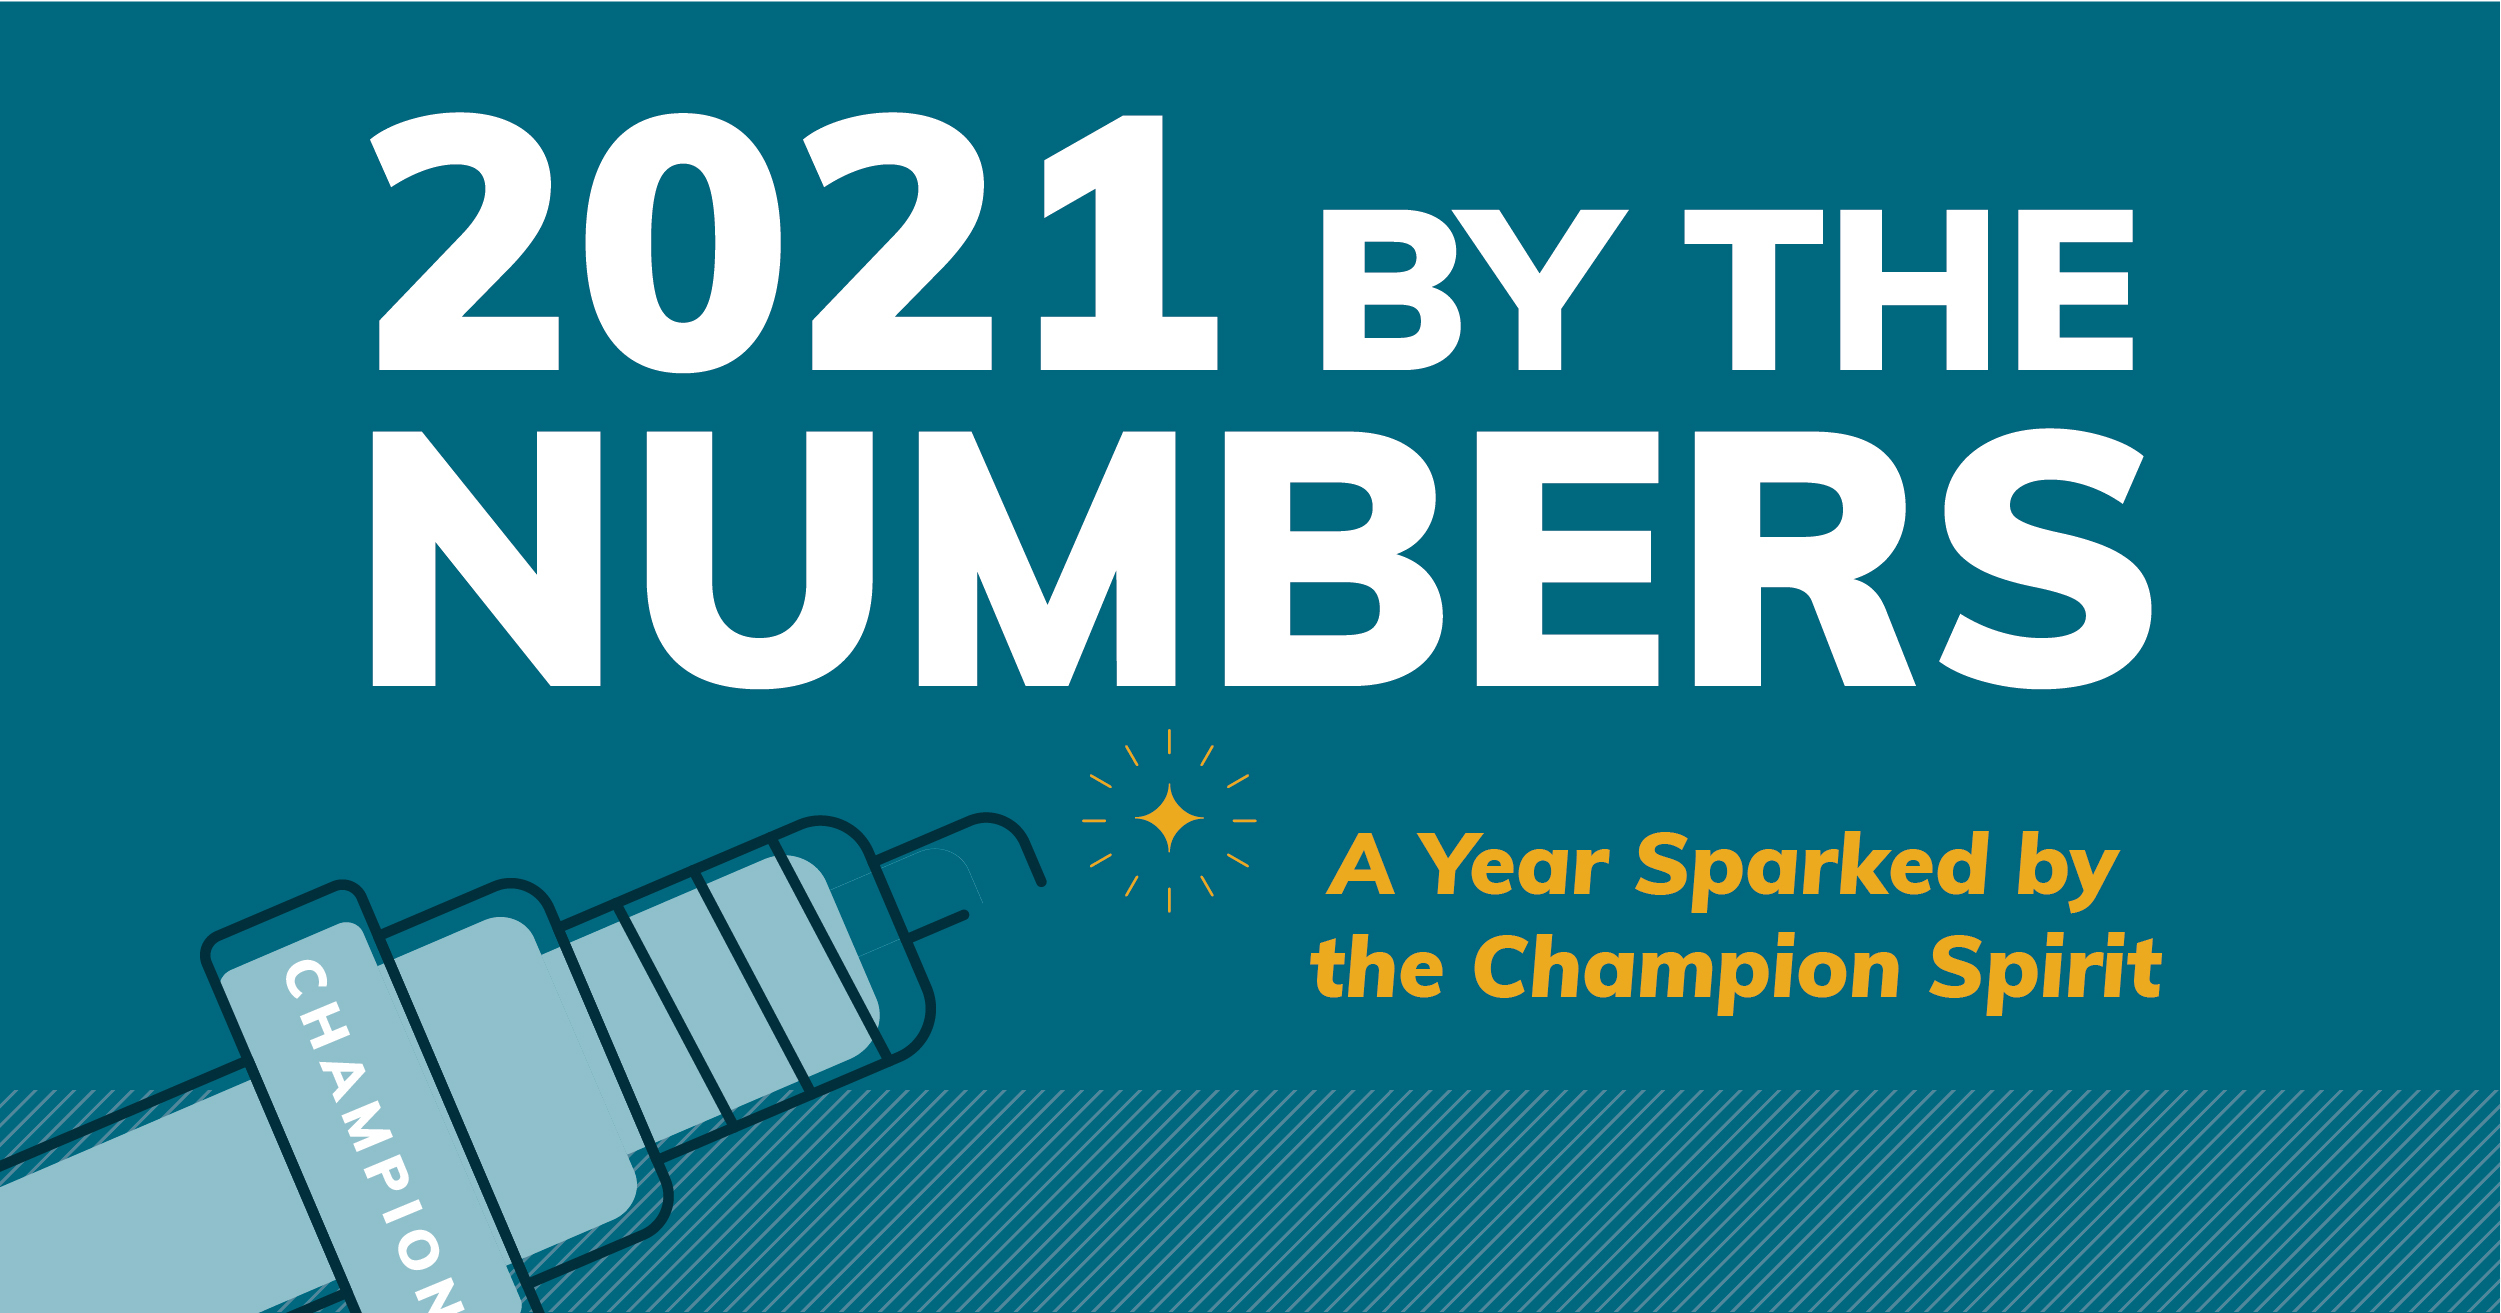 Text graphic that reads “2021 By The Numbers” and “A Year Sparked by the Champion Spirit”